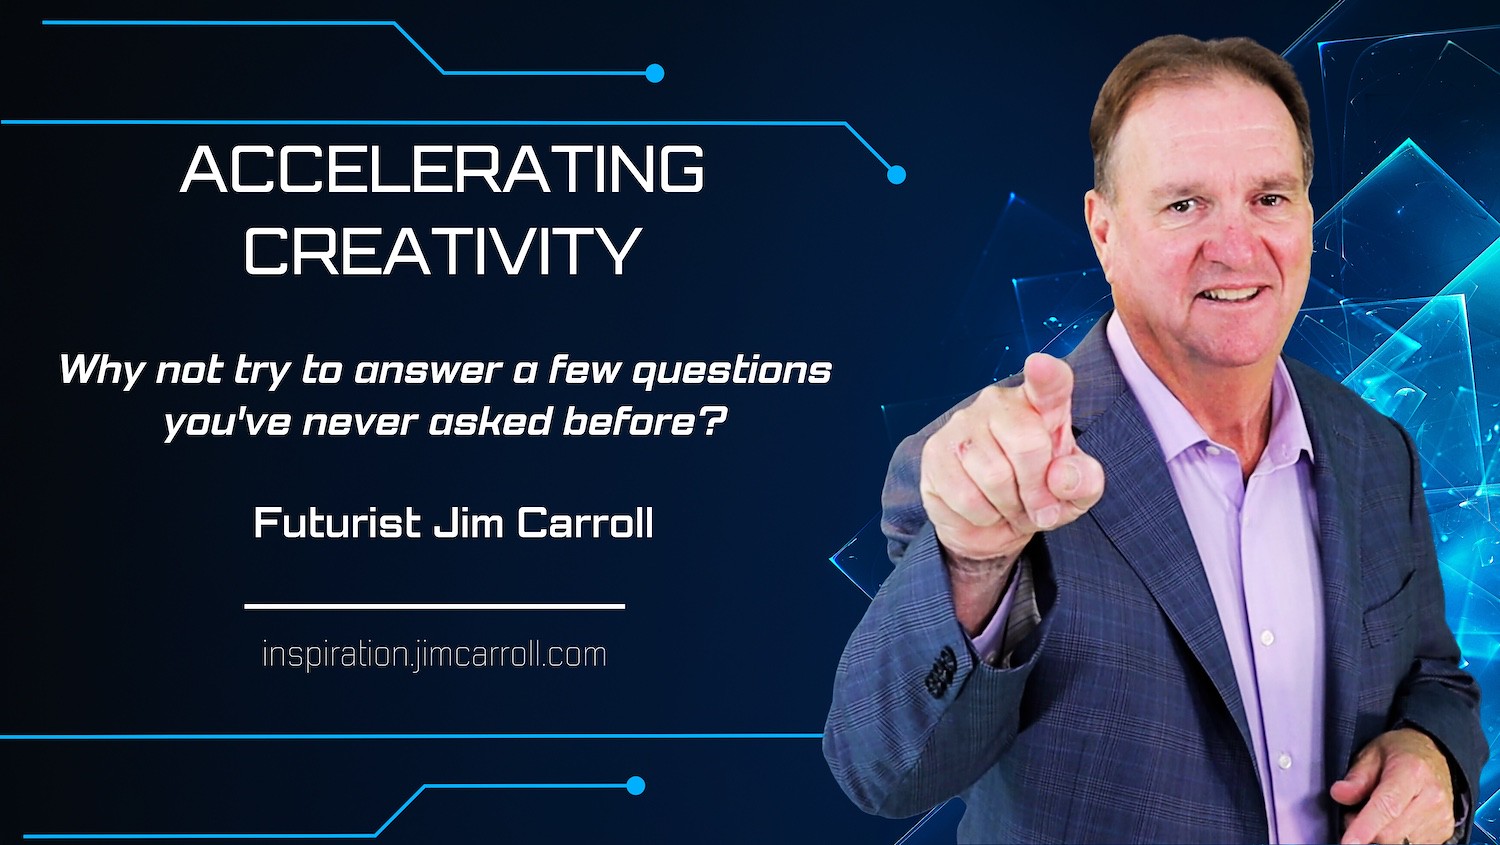 "Why not try to answer a few questions you've never asked before?" - Futurist Jim Carroll